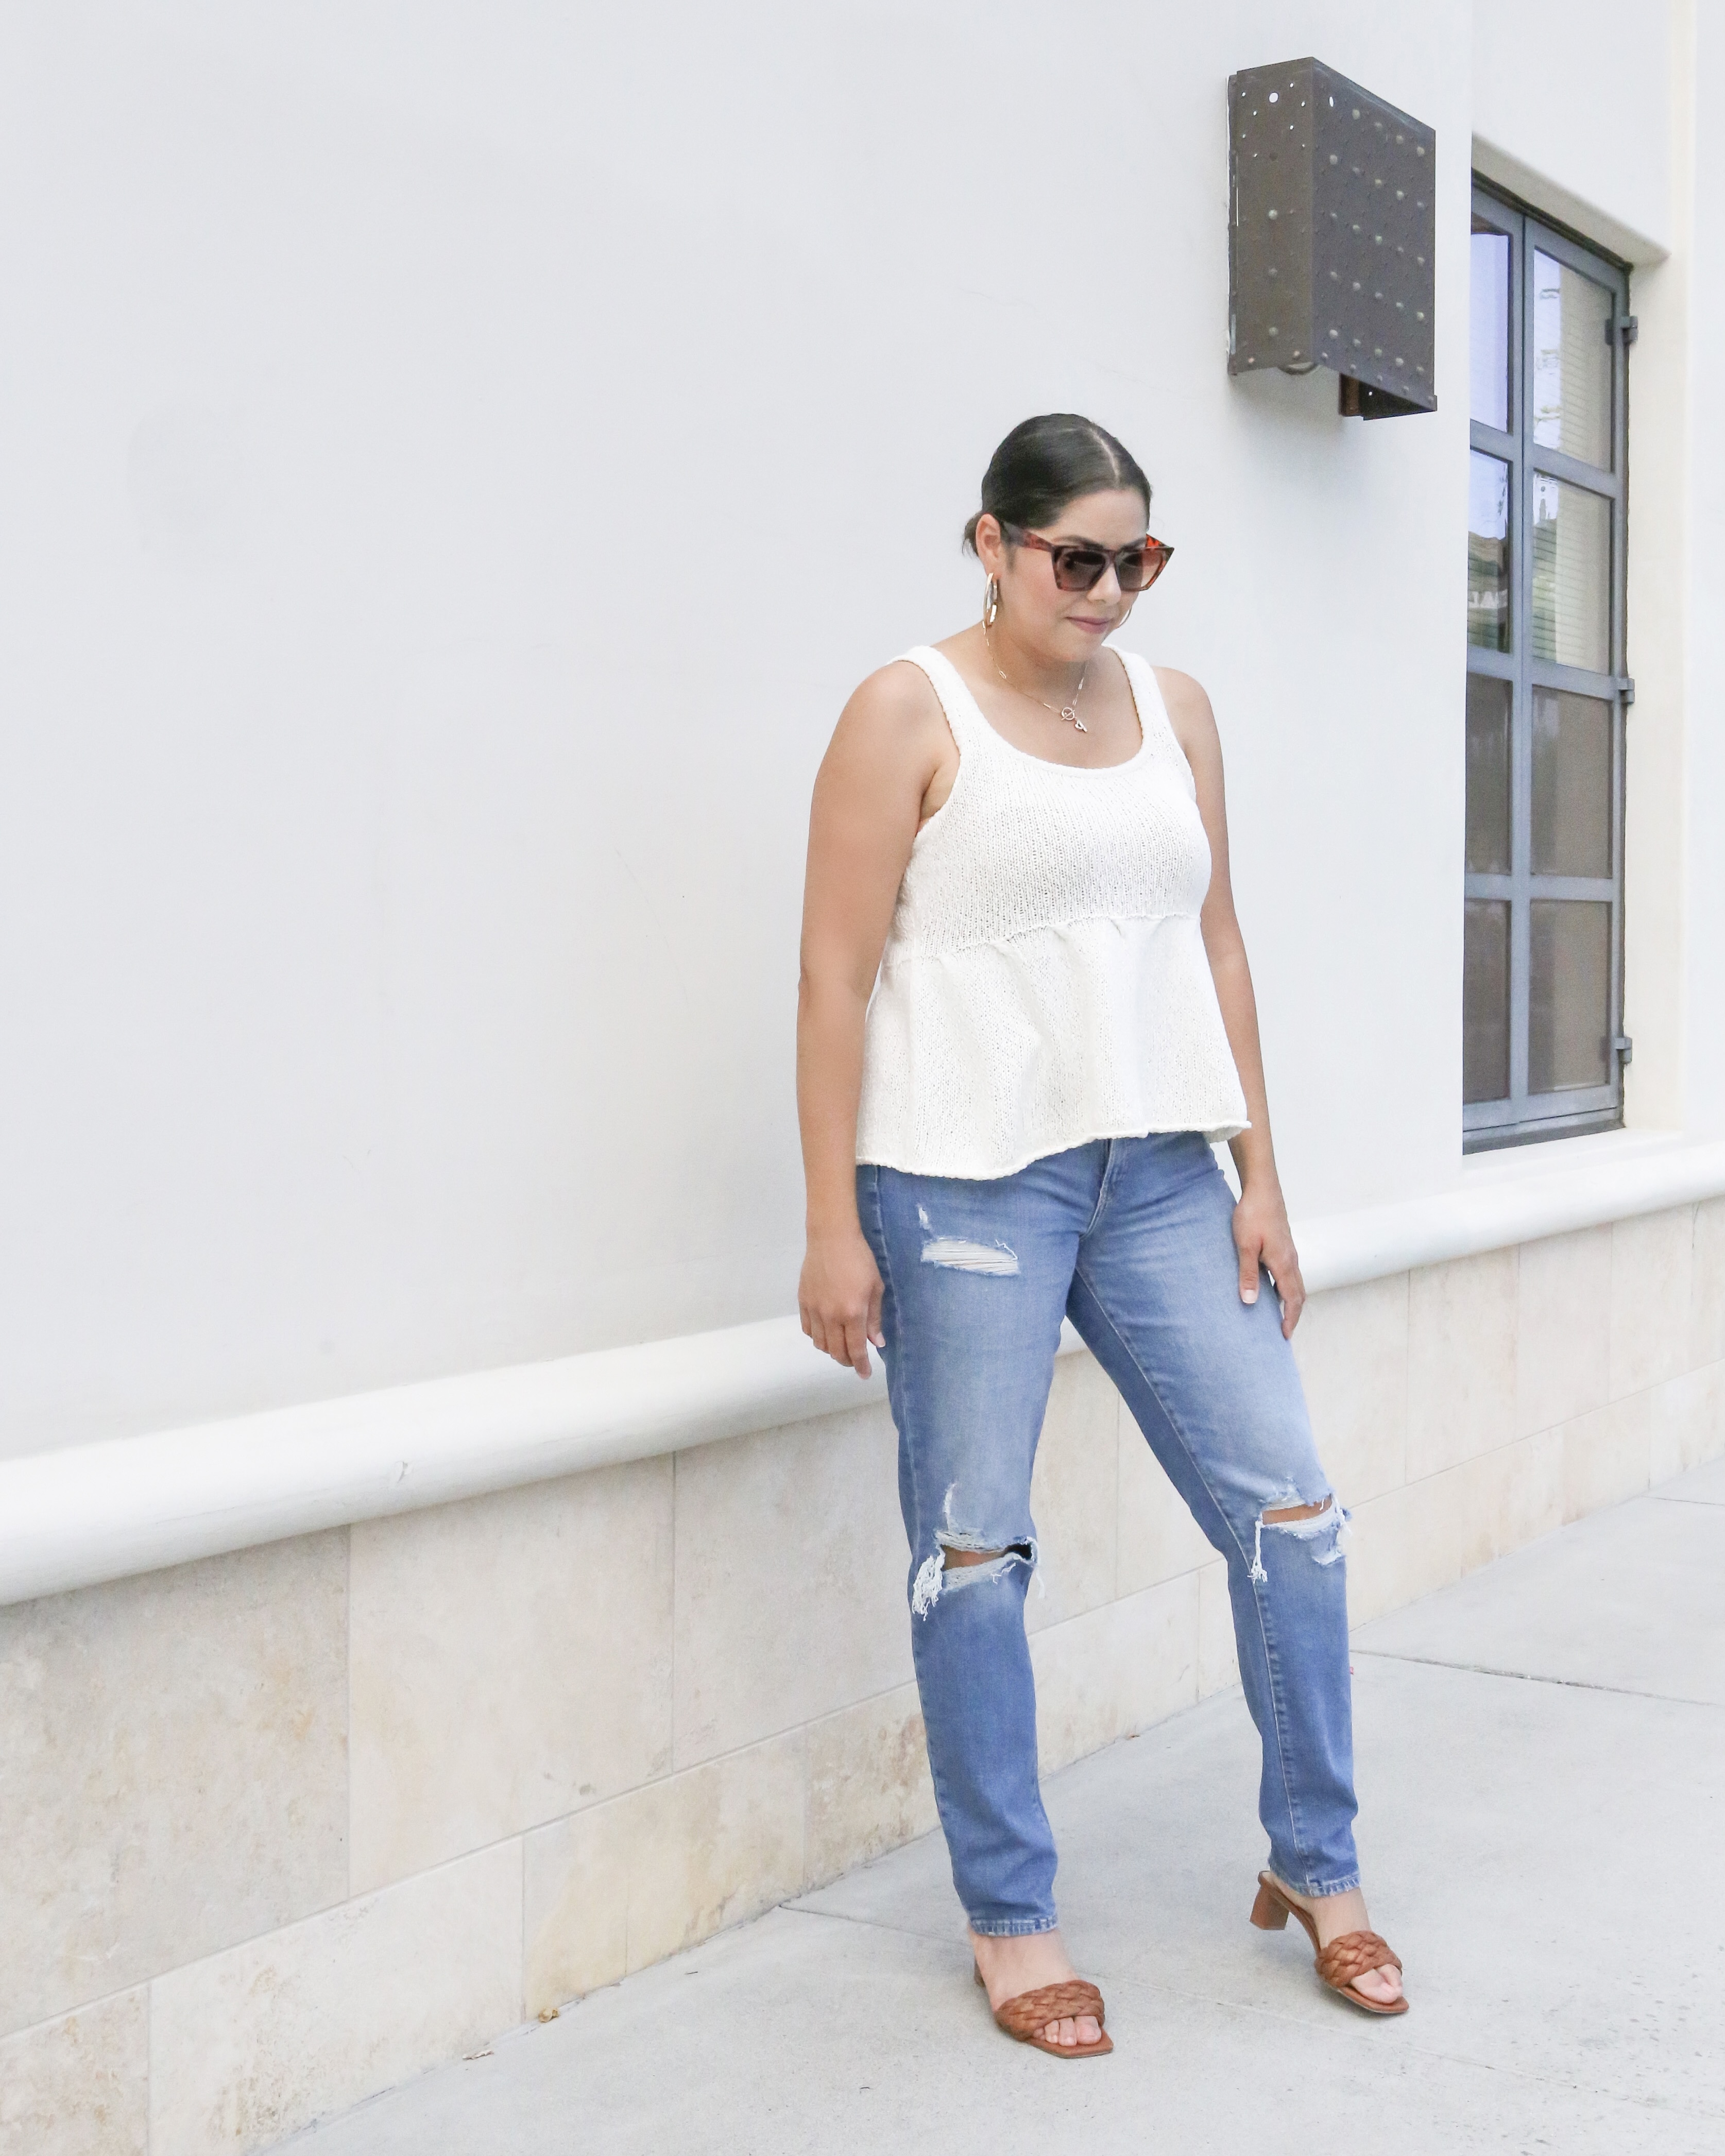 Effortless casual outfit with jeans, knit textured tank top